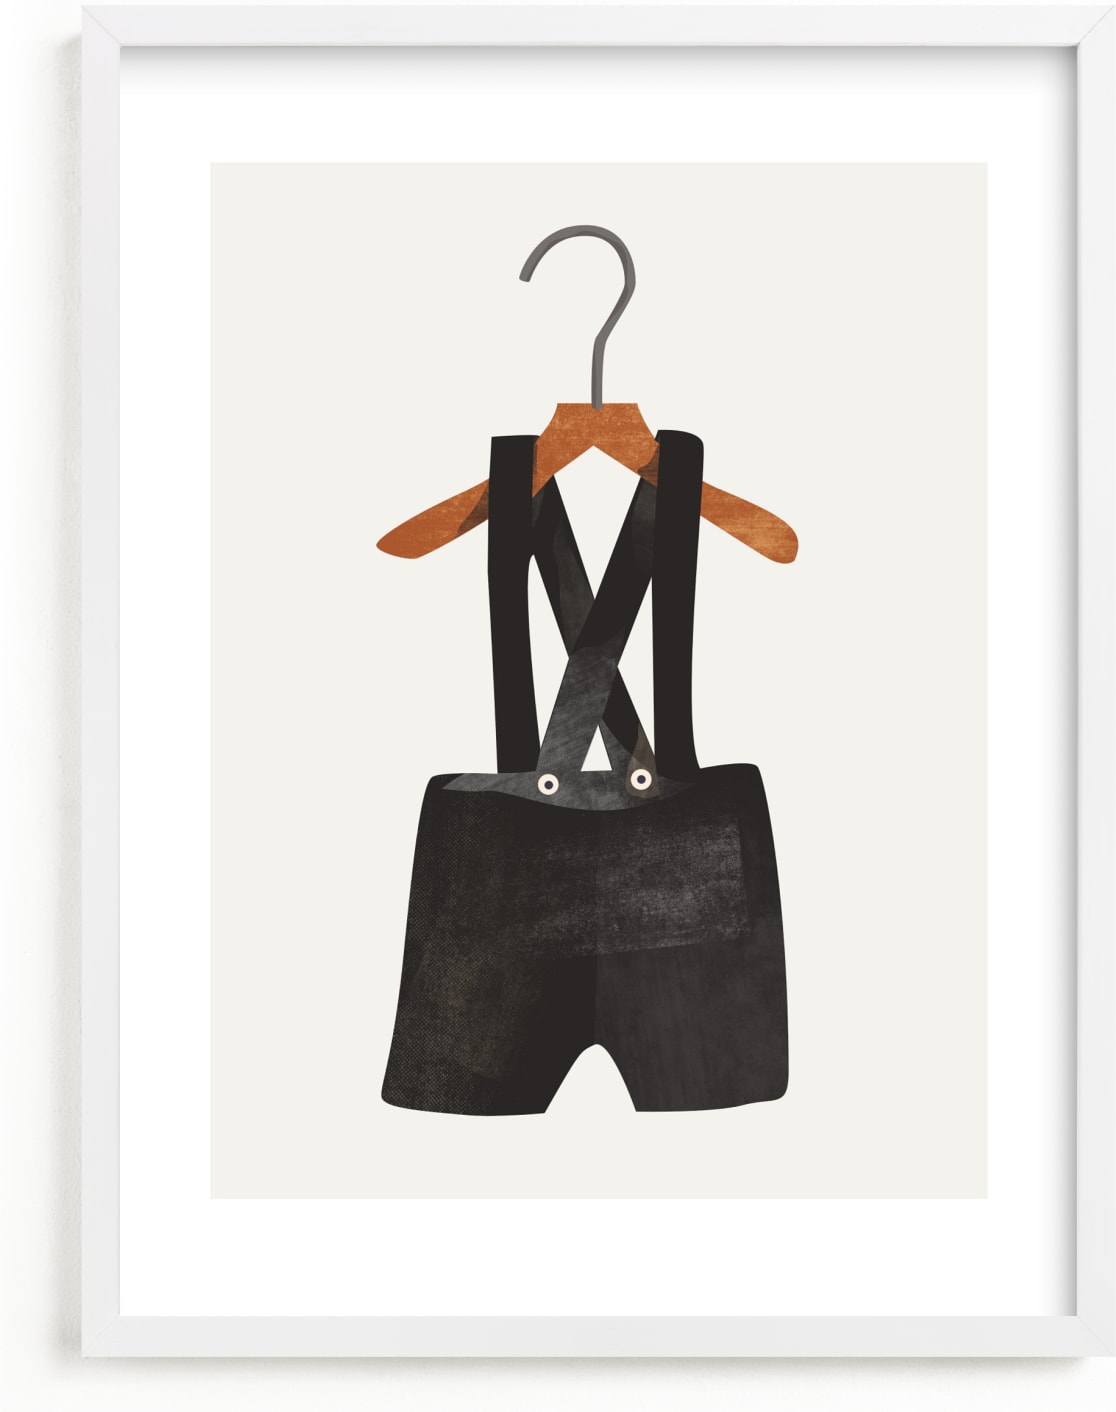 This is a black nursery wall art by Haley Warner called Overalls.